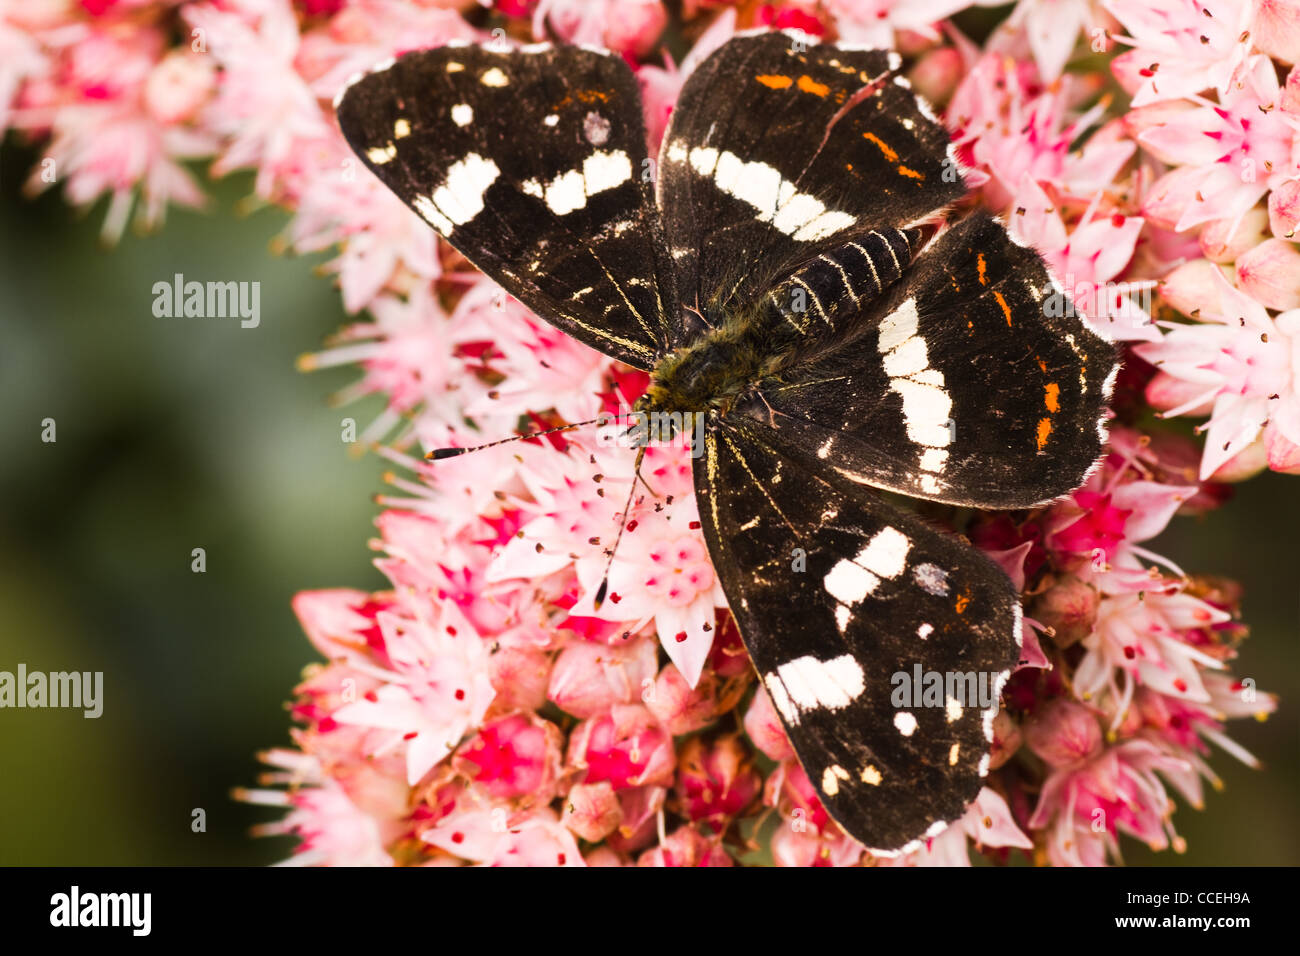 Dark colored summer generation of Map butterfly or Araschnia levana on Sedum flowers in autumn Stock Photo